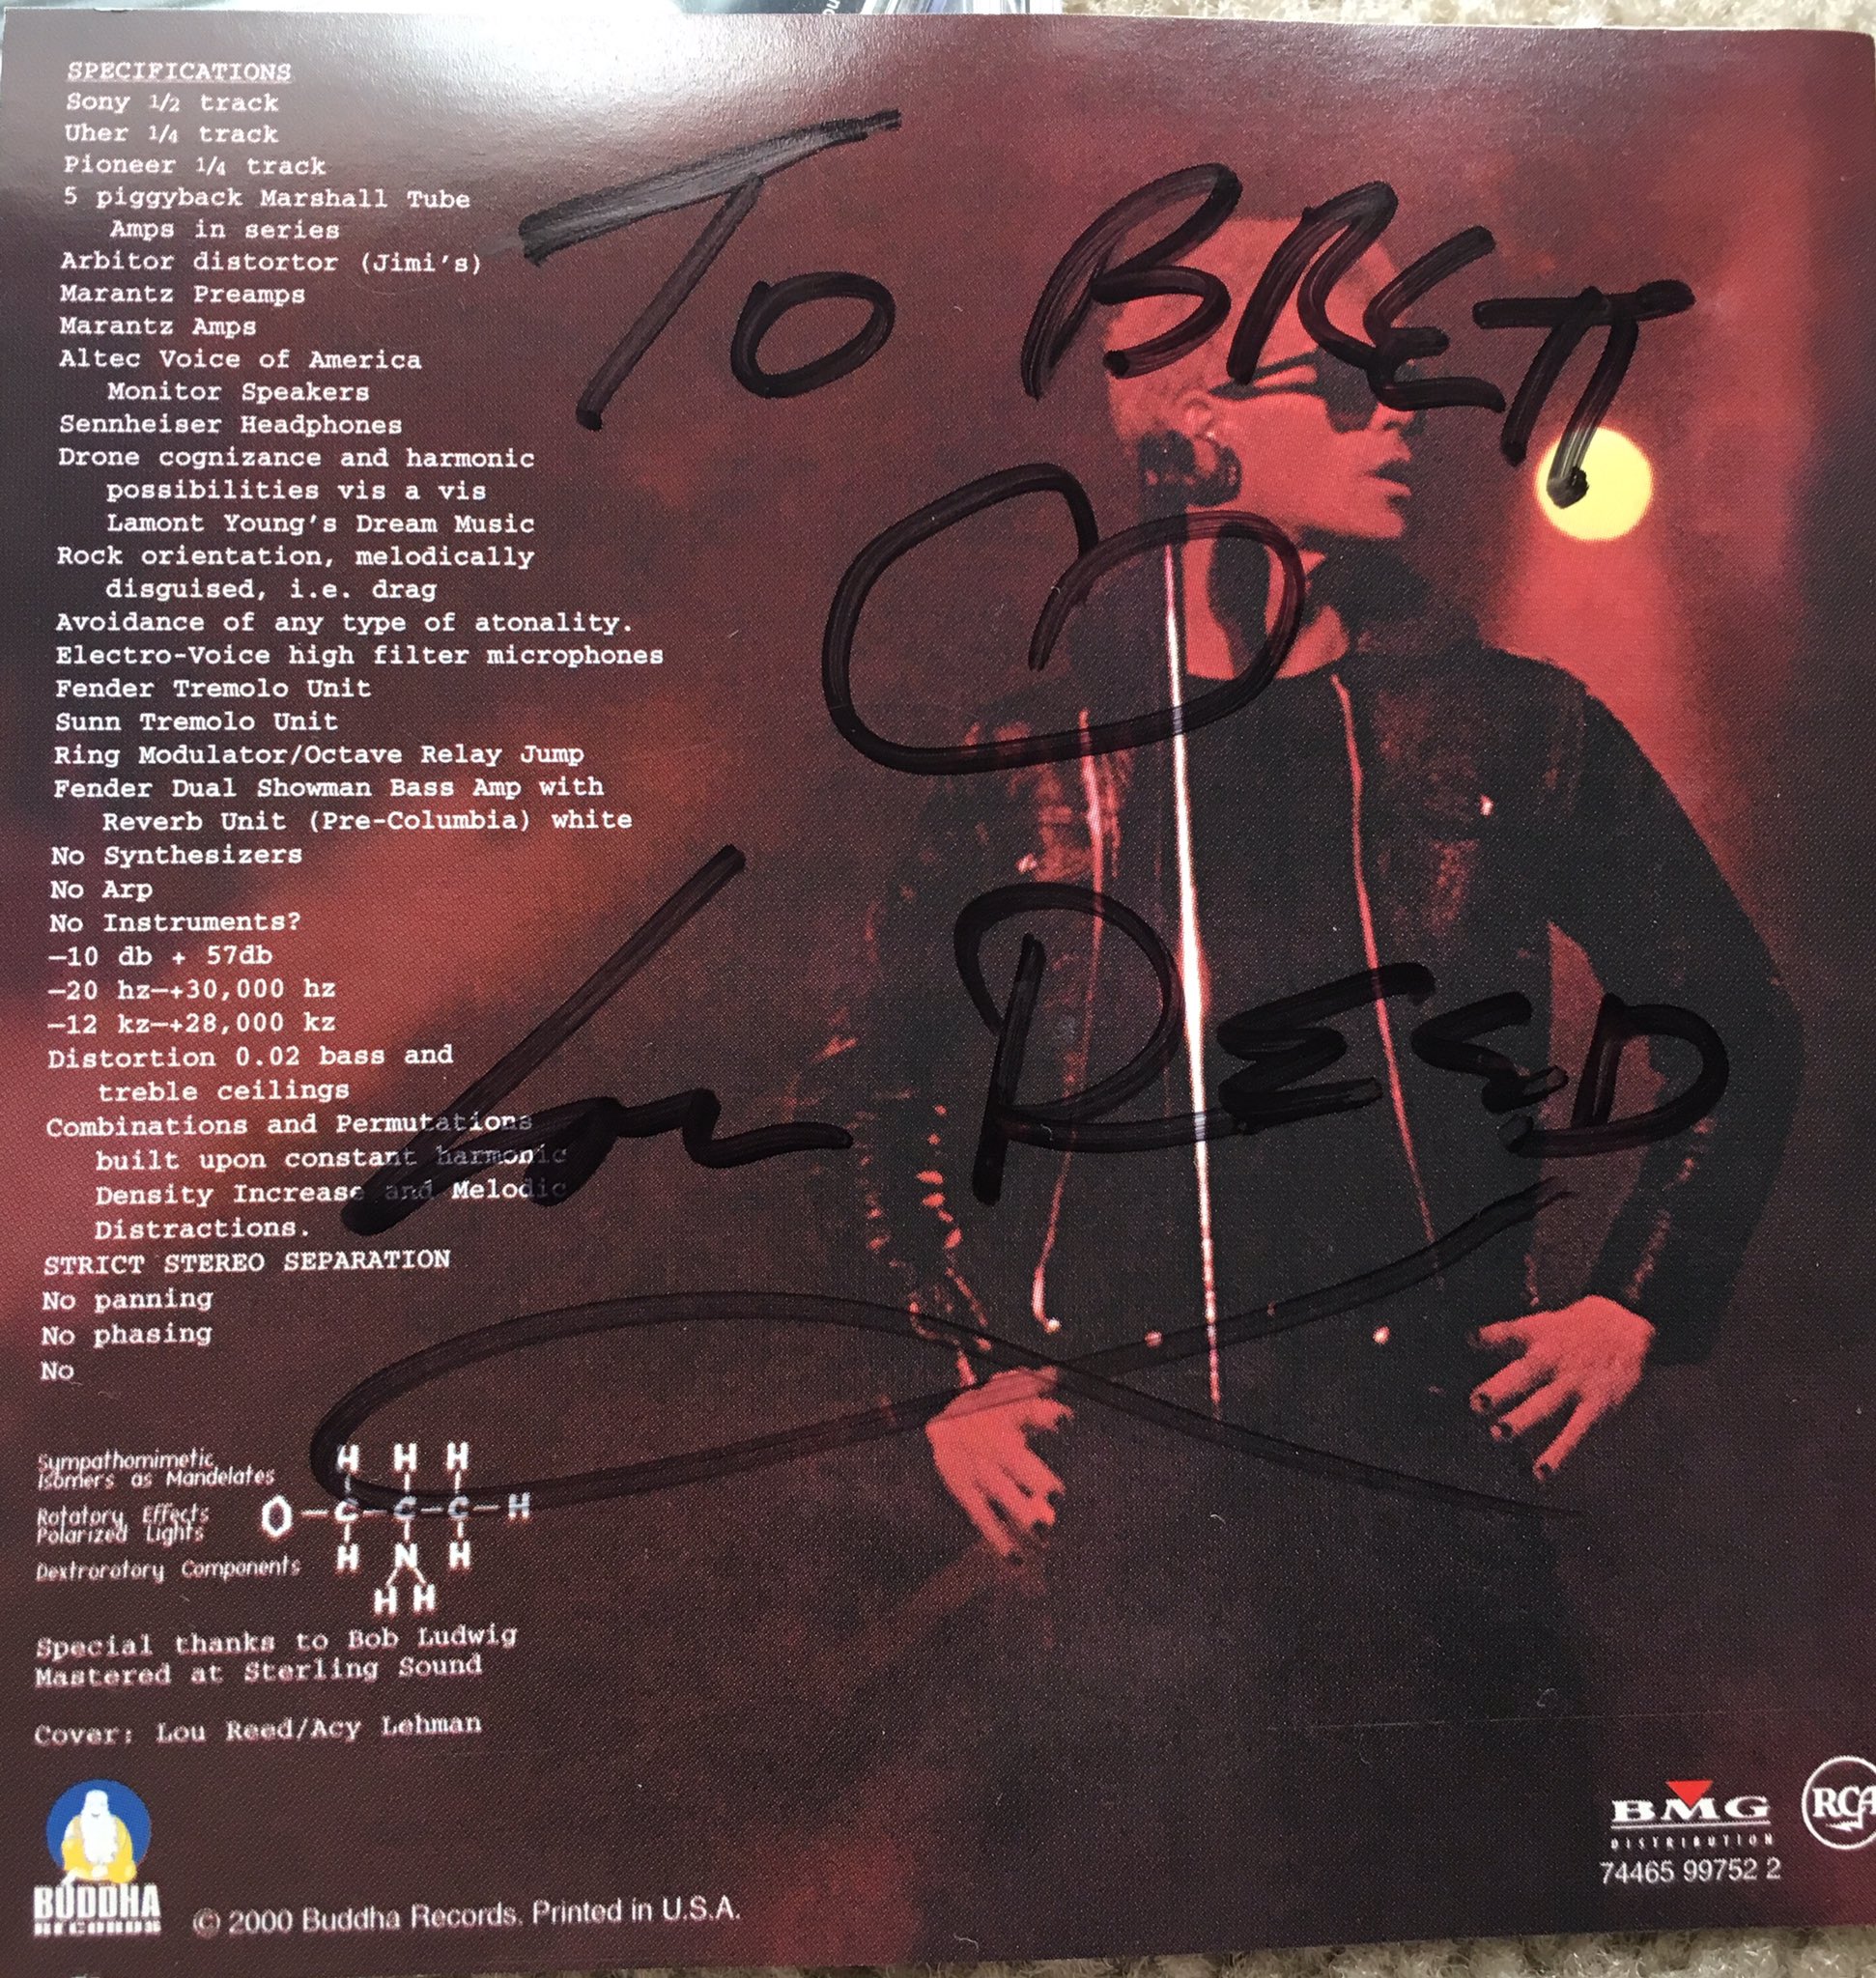 Lou Reed autographed my copy of METAL MACHINE MUSIC - who cares if he misspelled my name?
Happy birthday, Lou. 